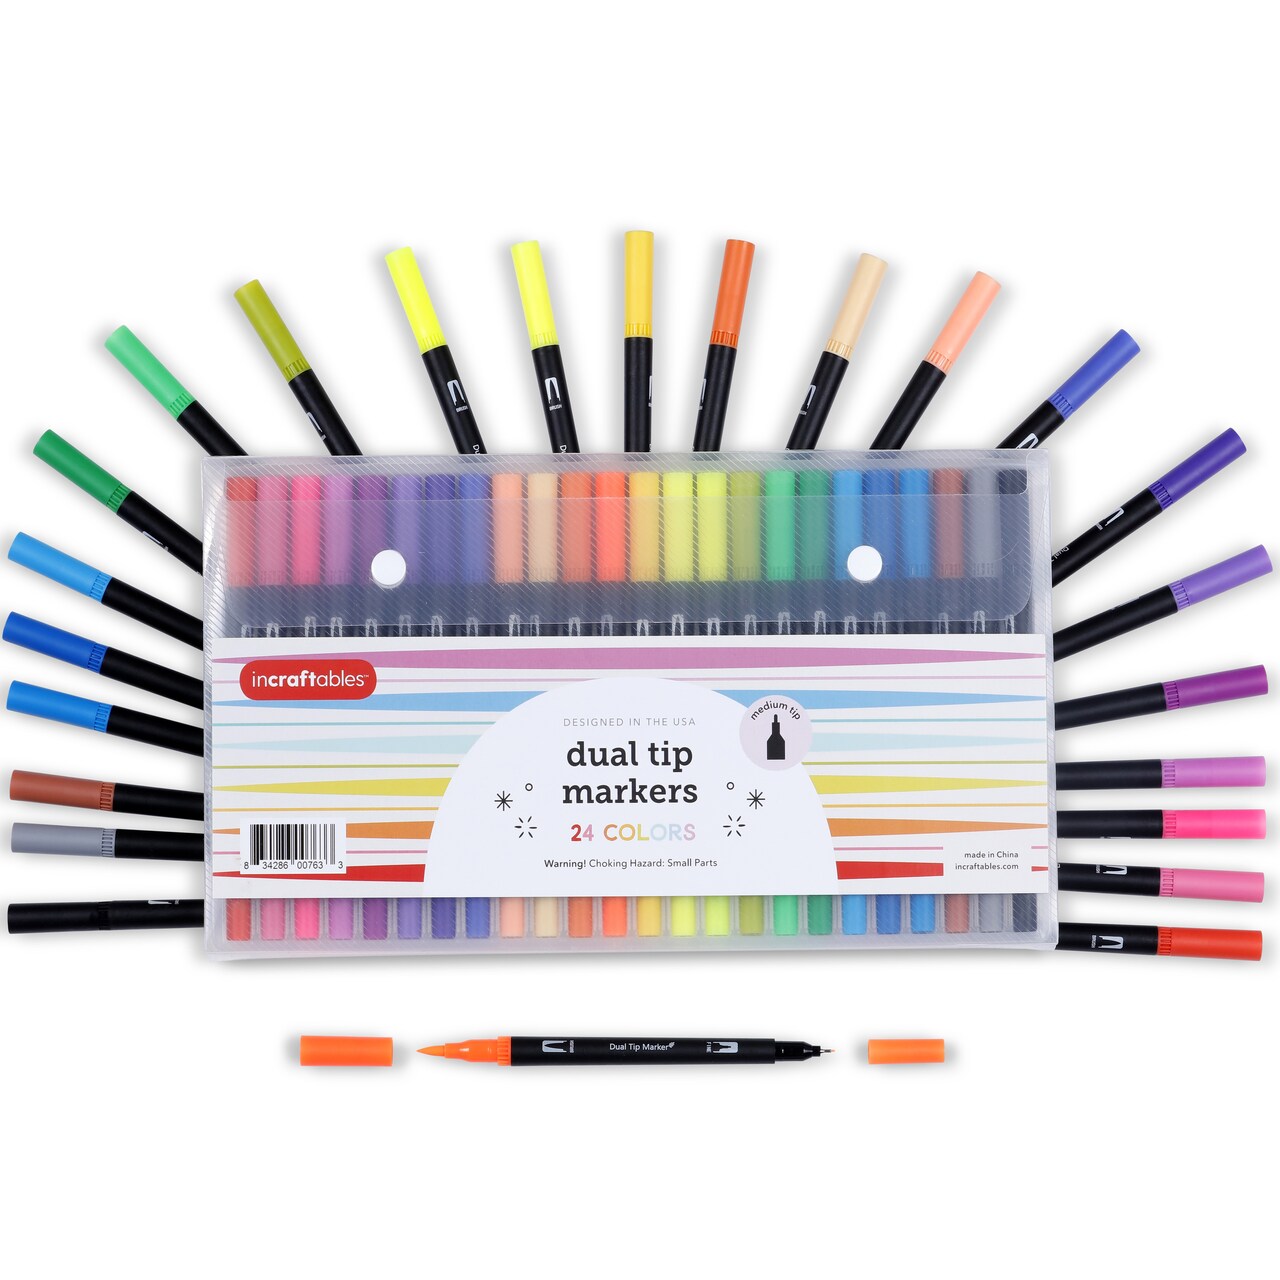 Incraftables Dual Tip Markers Set (24 Colors). Best Fine Tip Markers for Adult Coloring No Bleed. Assorted Brush Tip Markers for Adult Coloring Books. Colored Drawing Markers Pens for Kids &#x26; Adults